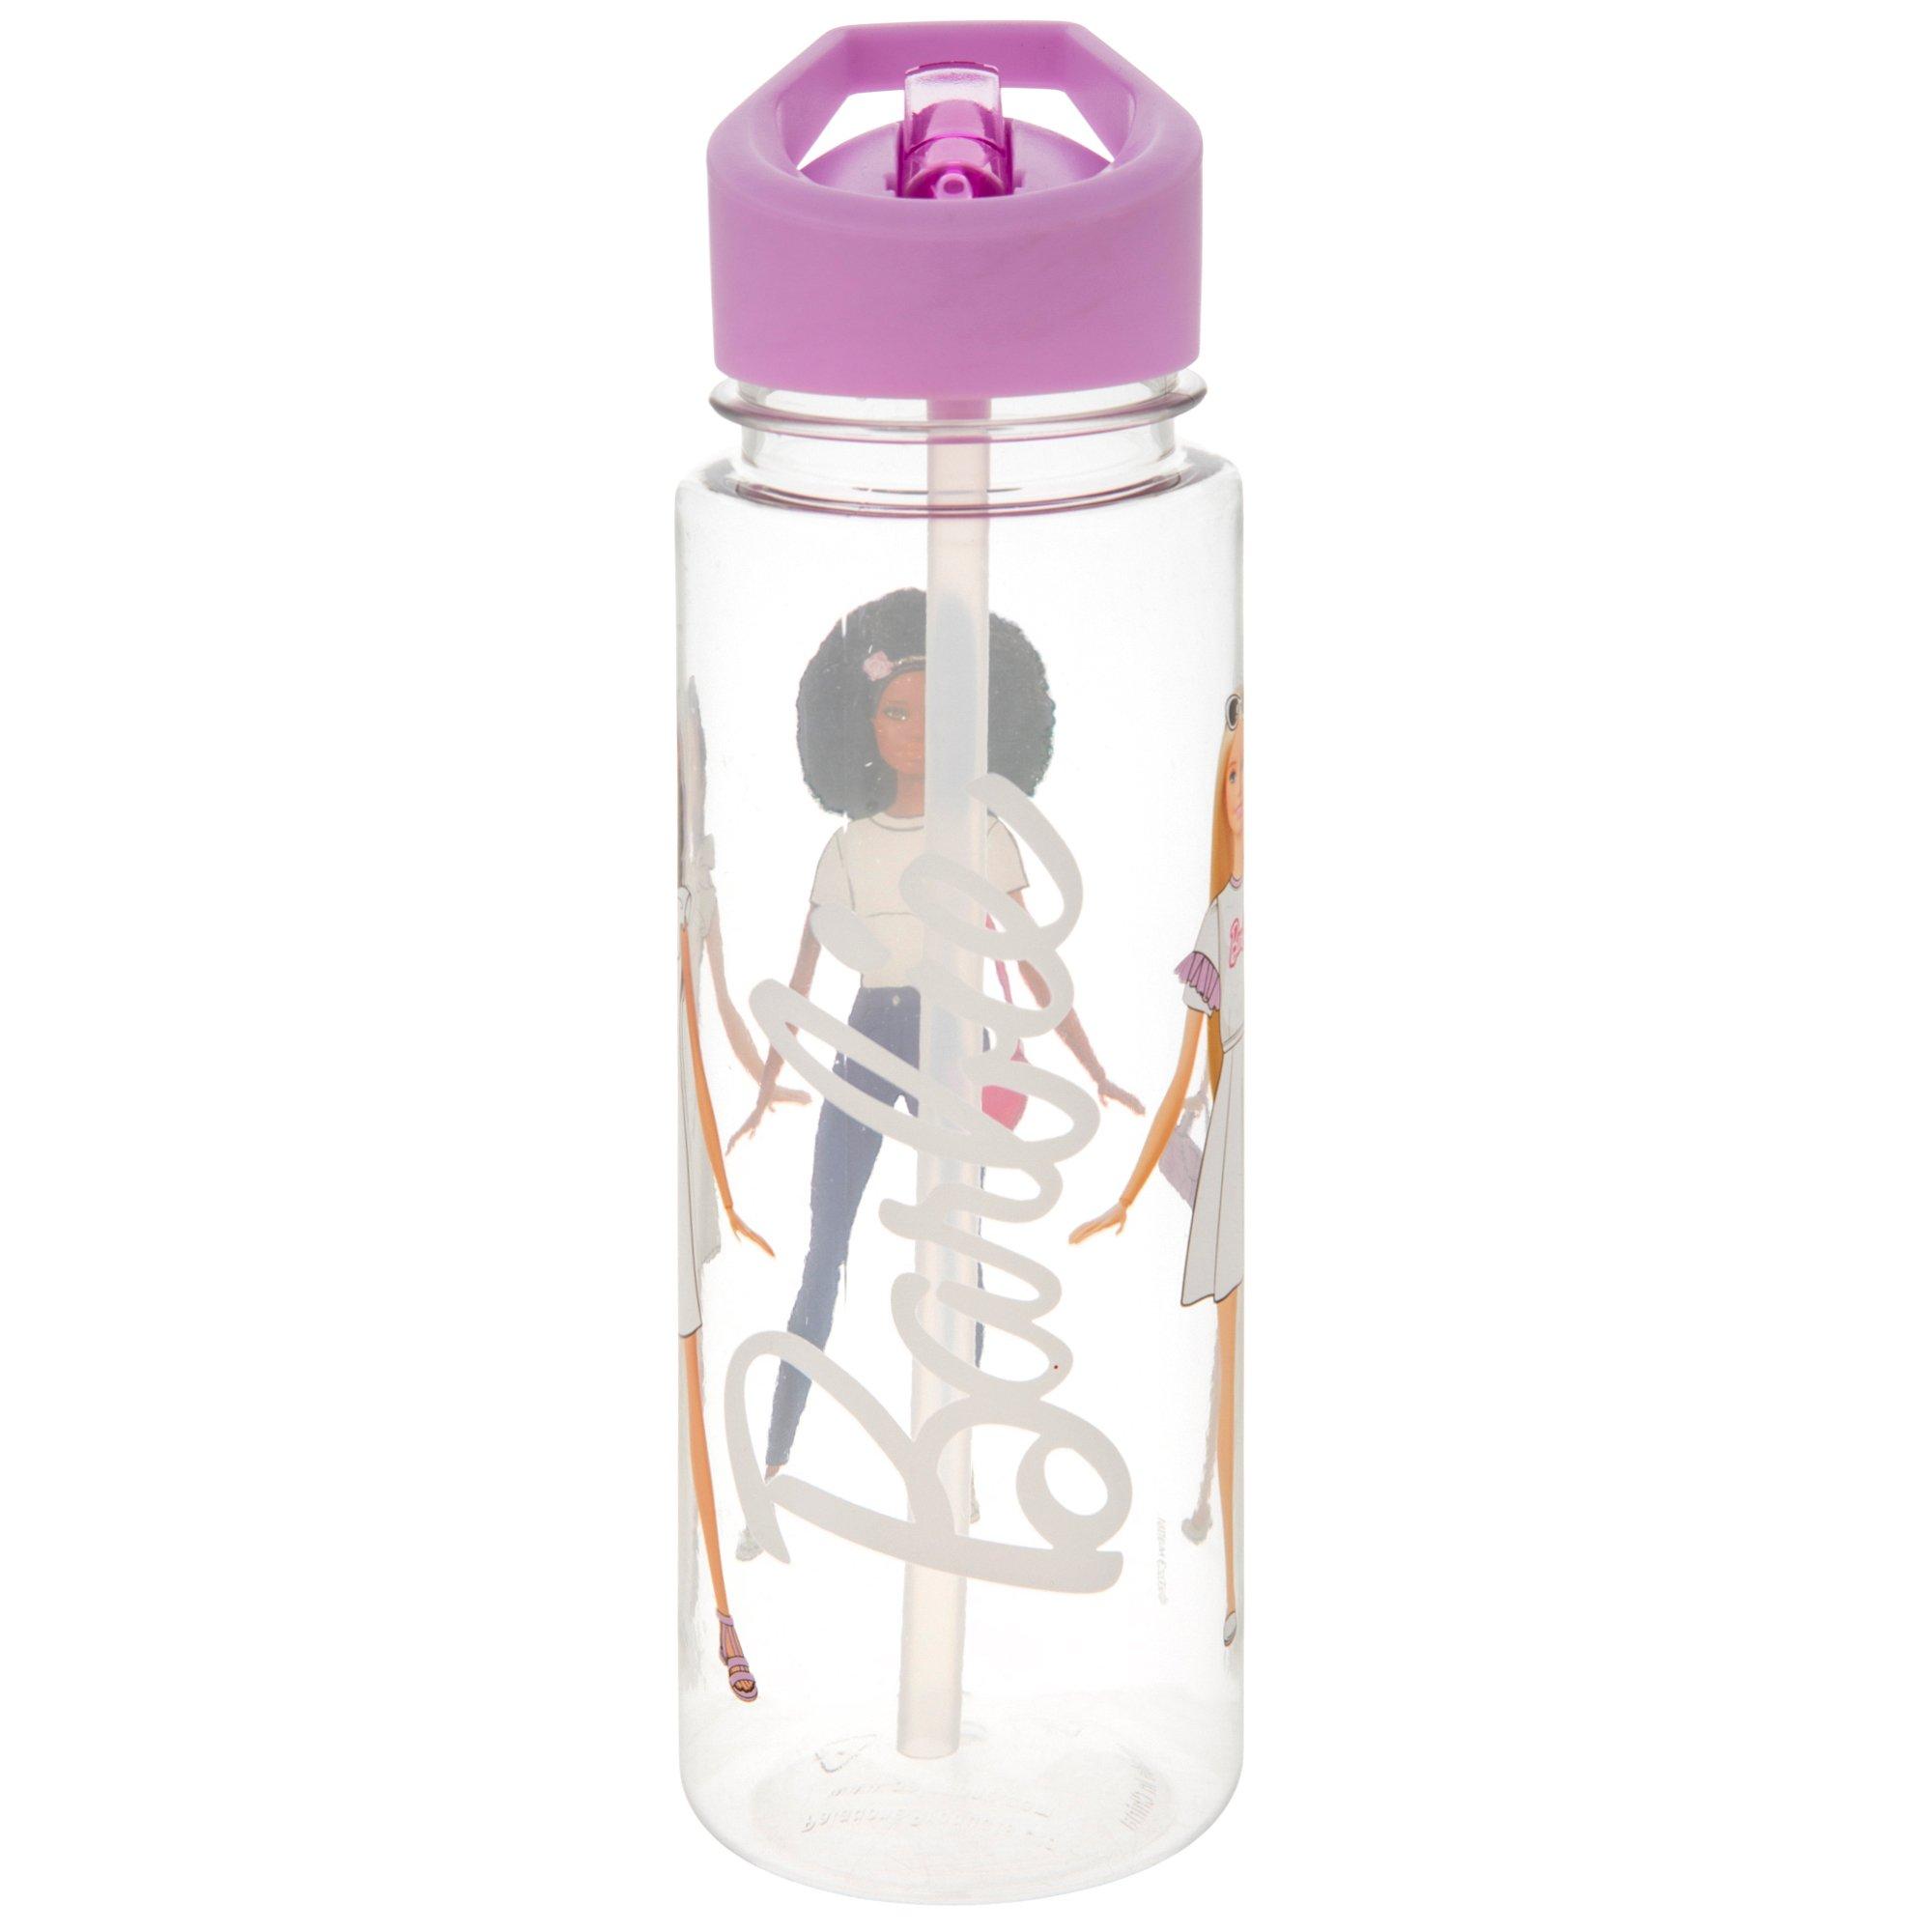 Barbie doll SPRING water bottle large 2 1/8 tall handle clear